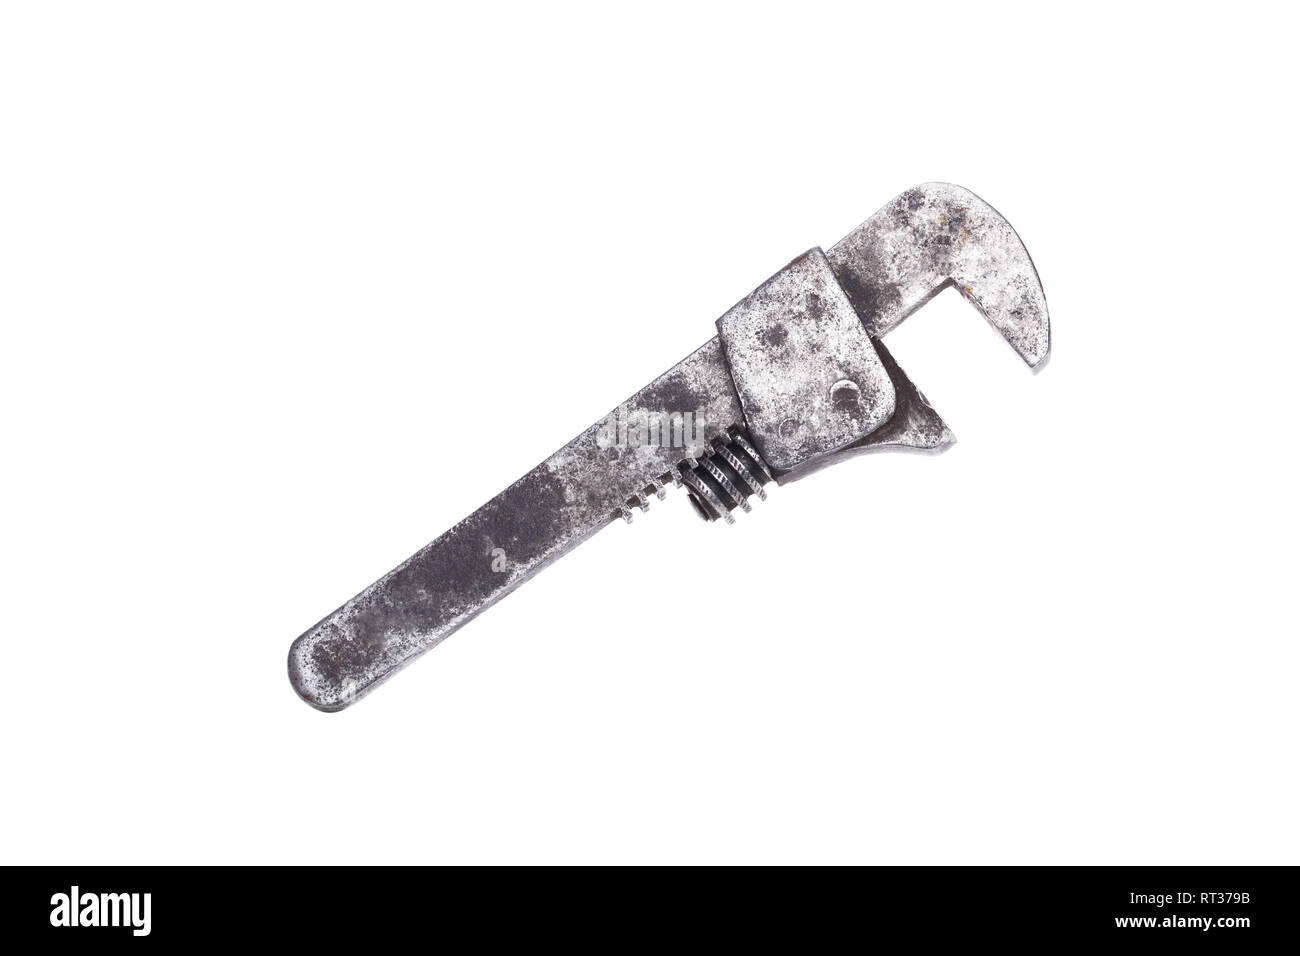 Image of adjustable wrench close-up Stock Photo